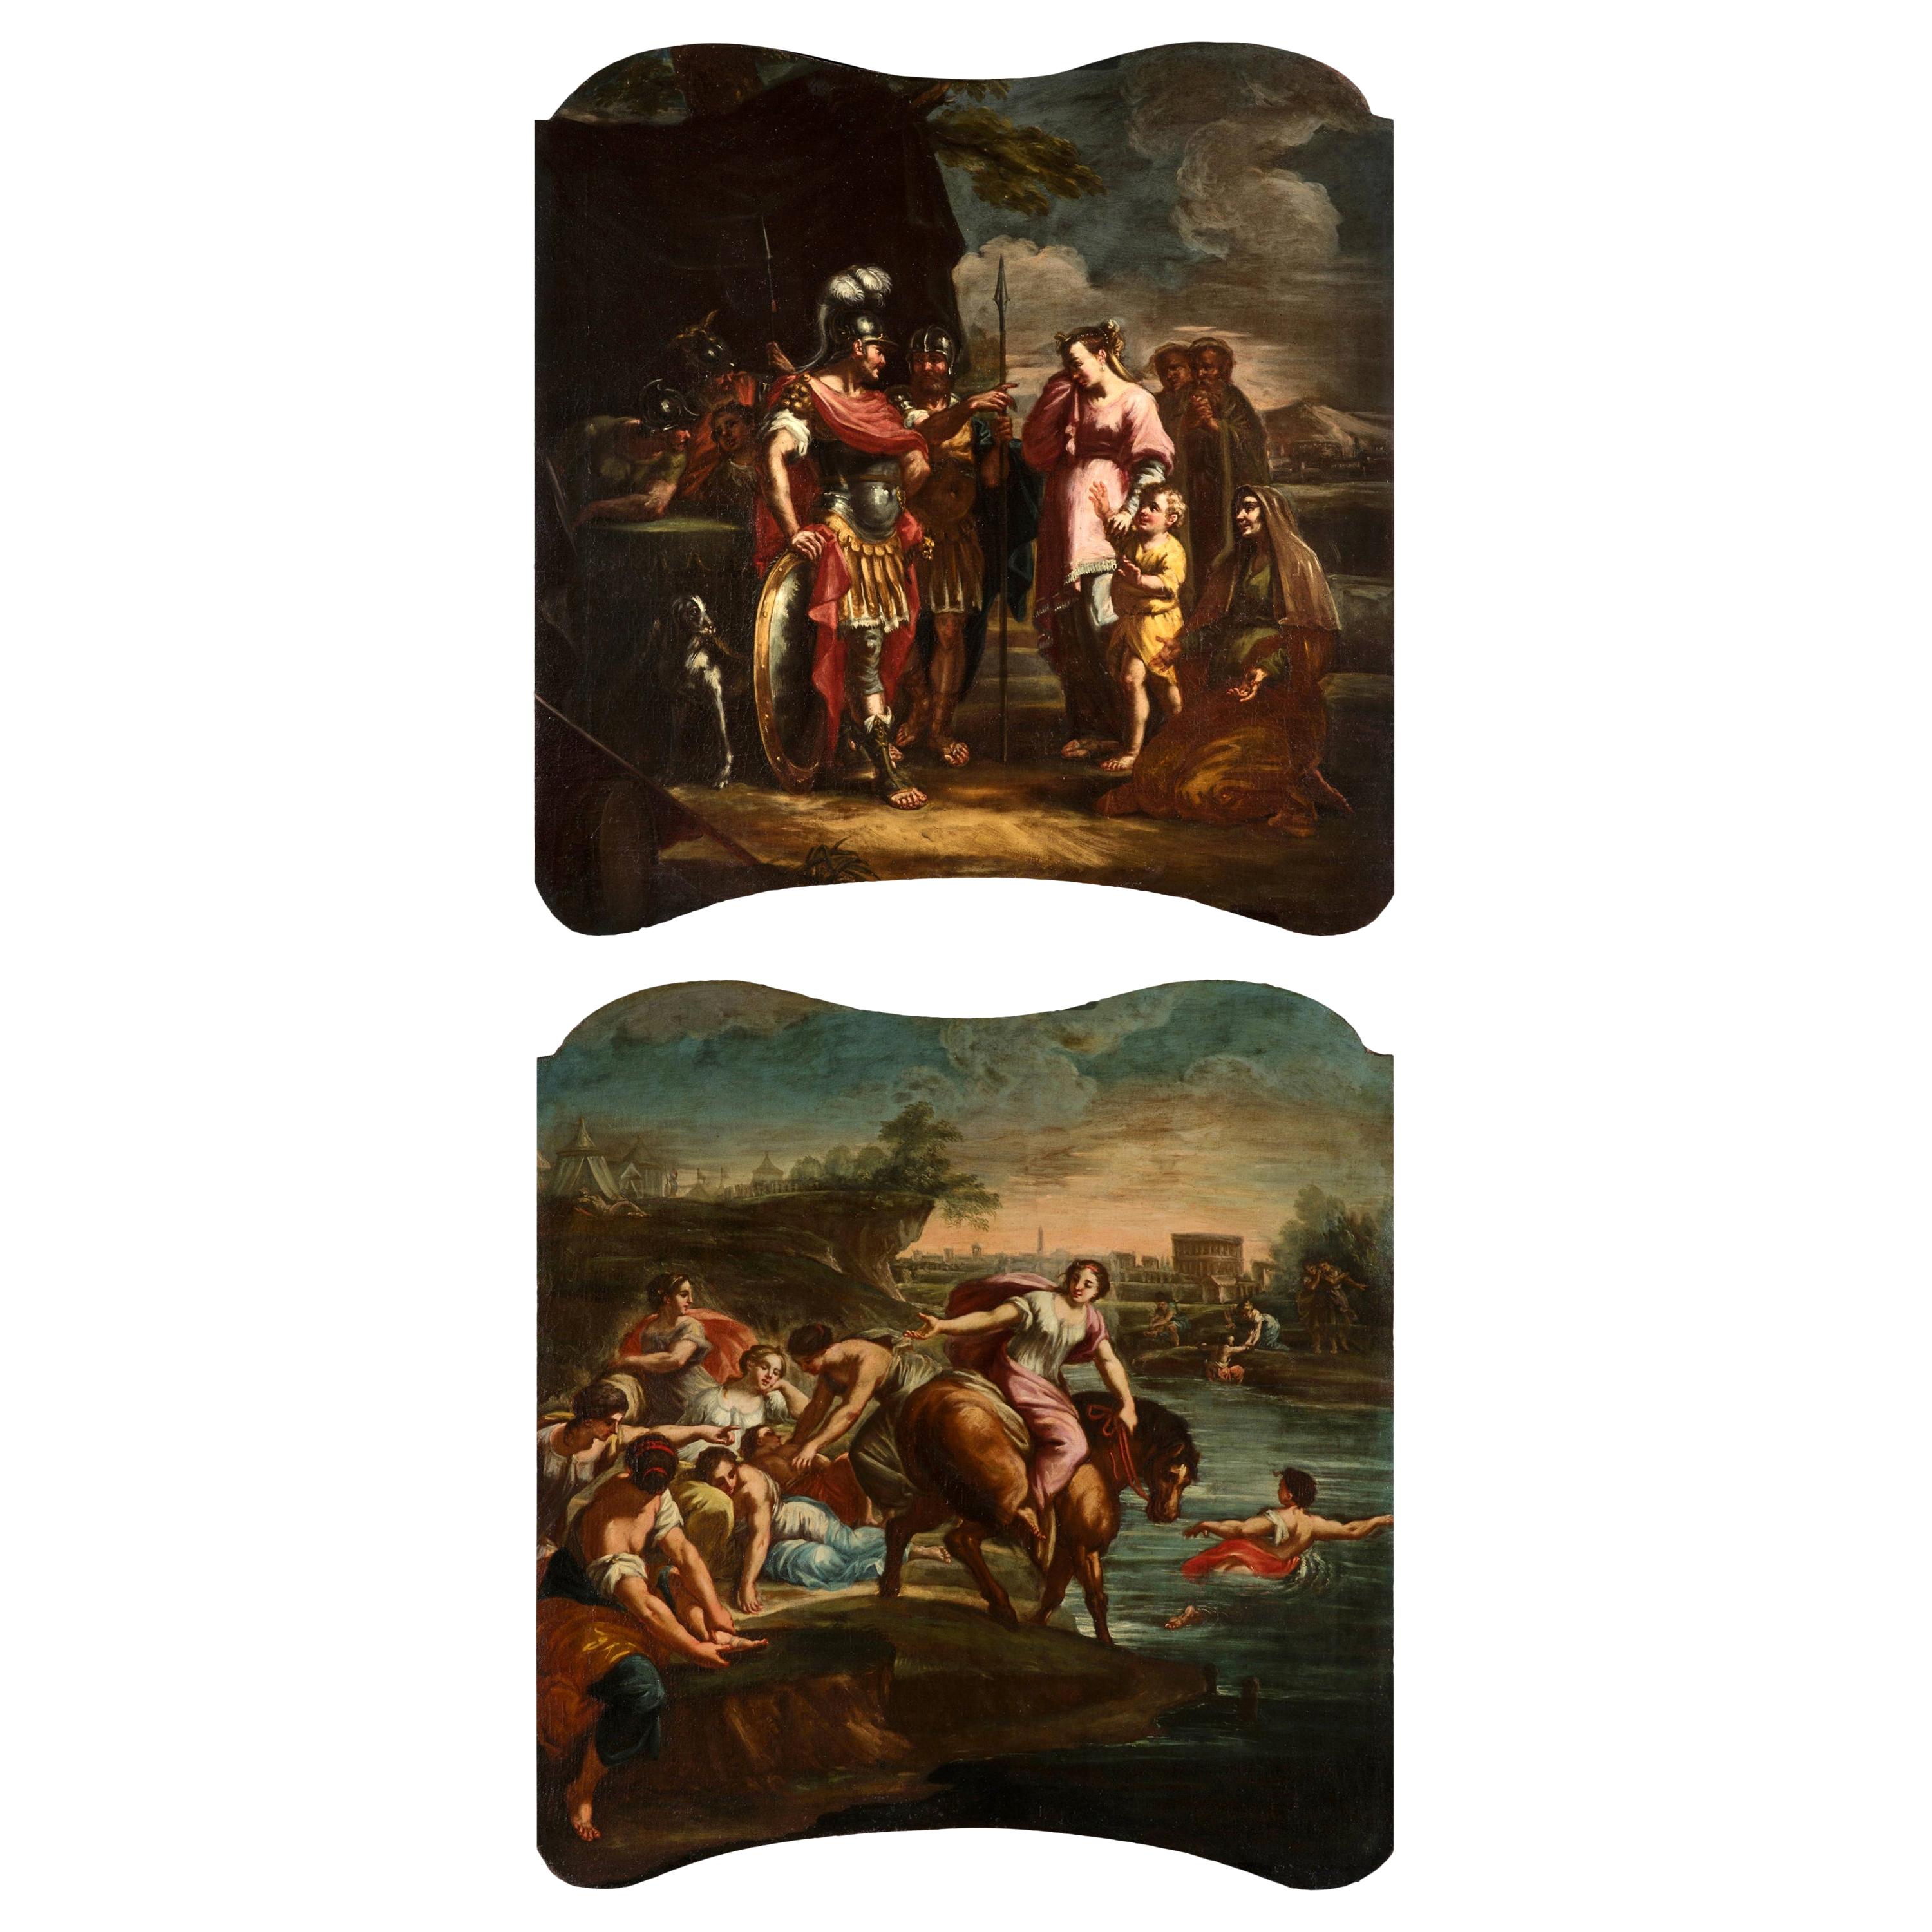 18th Century, Pair of Italian Paintings with Stories of Rome by Felice Cervetti